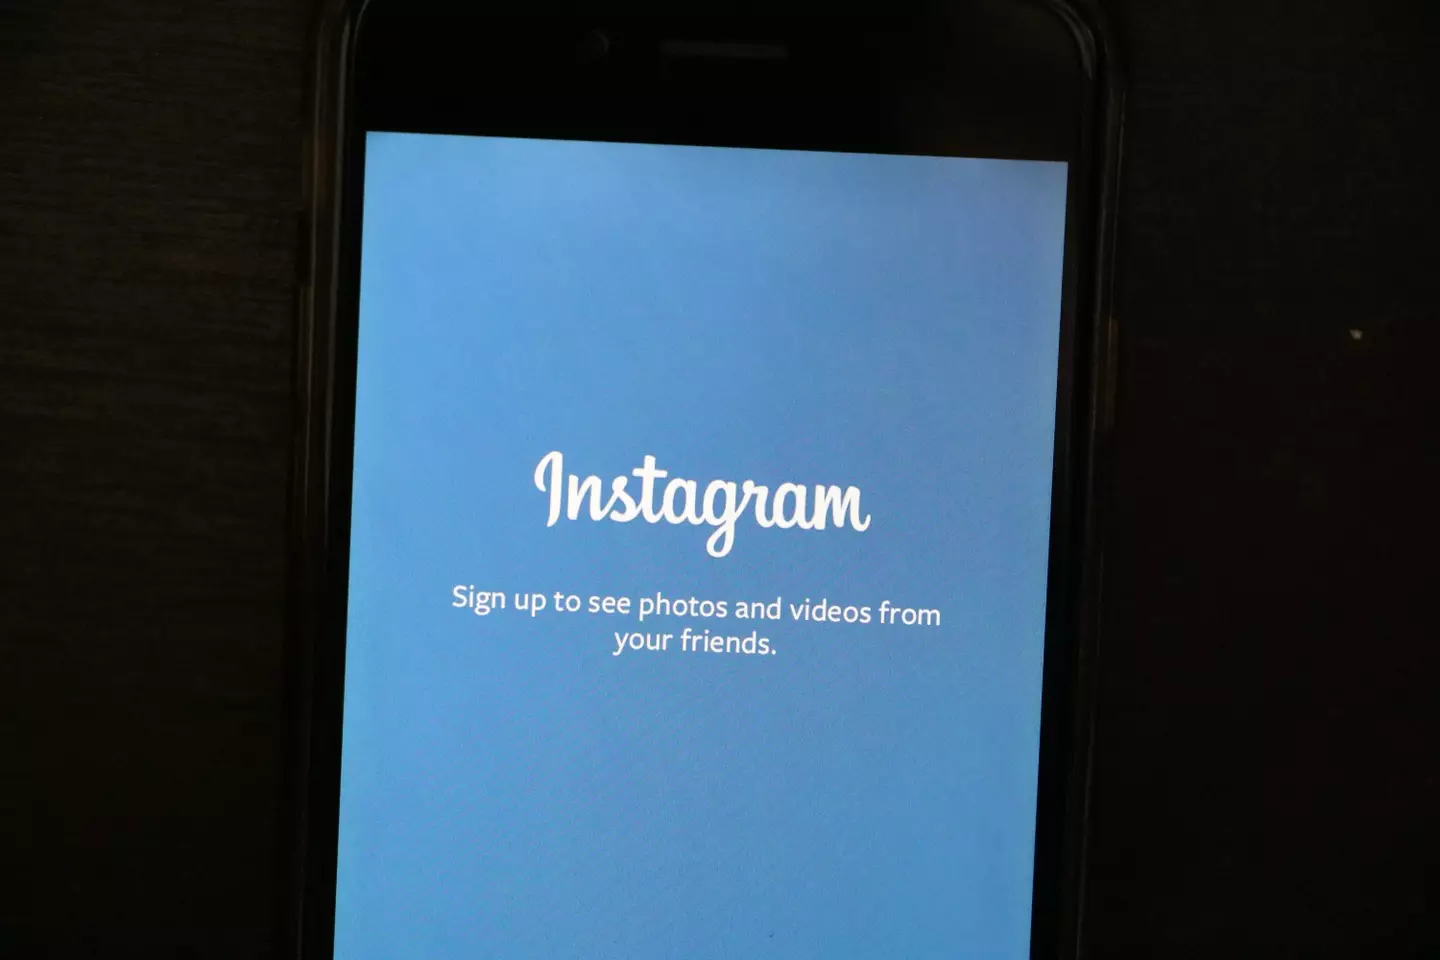 Instagram seems to have resolved the issue with an app update.